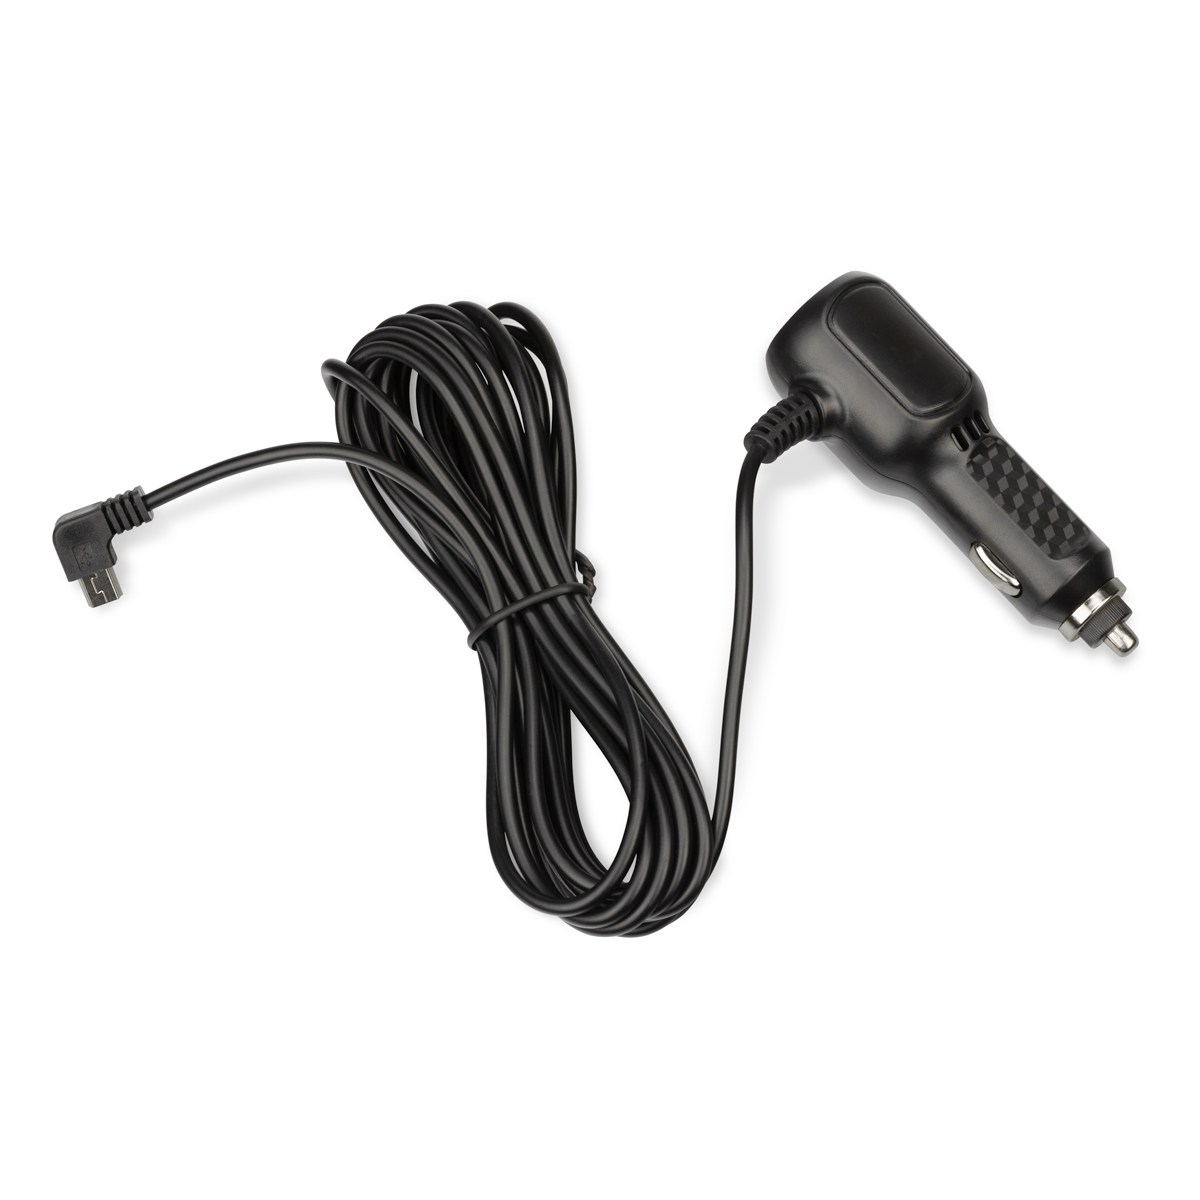 BML ELECTRONICS BML dCam3 car charger